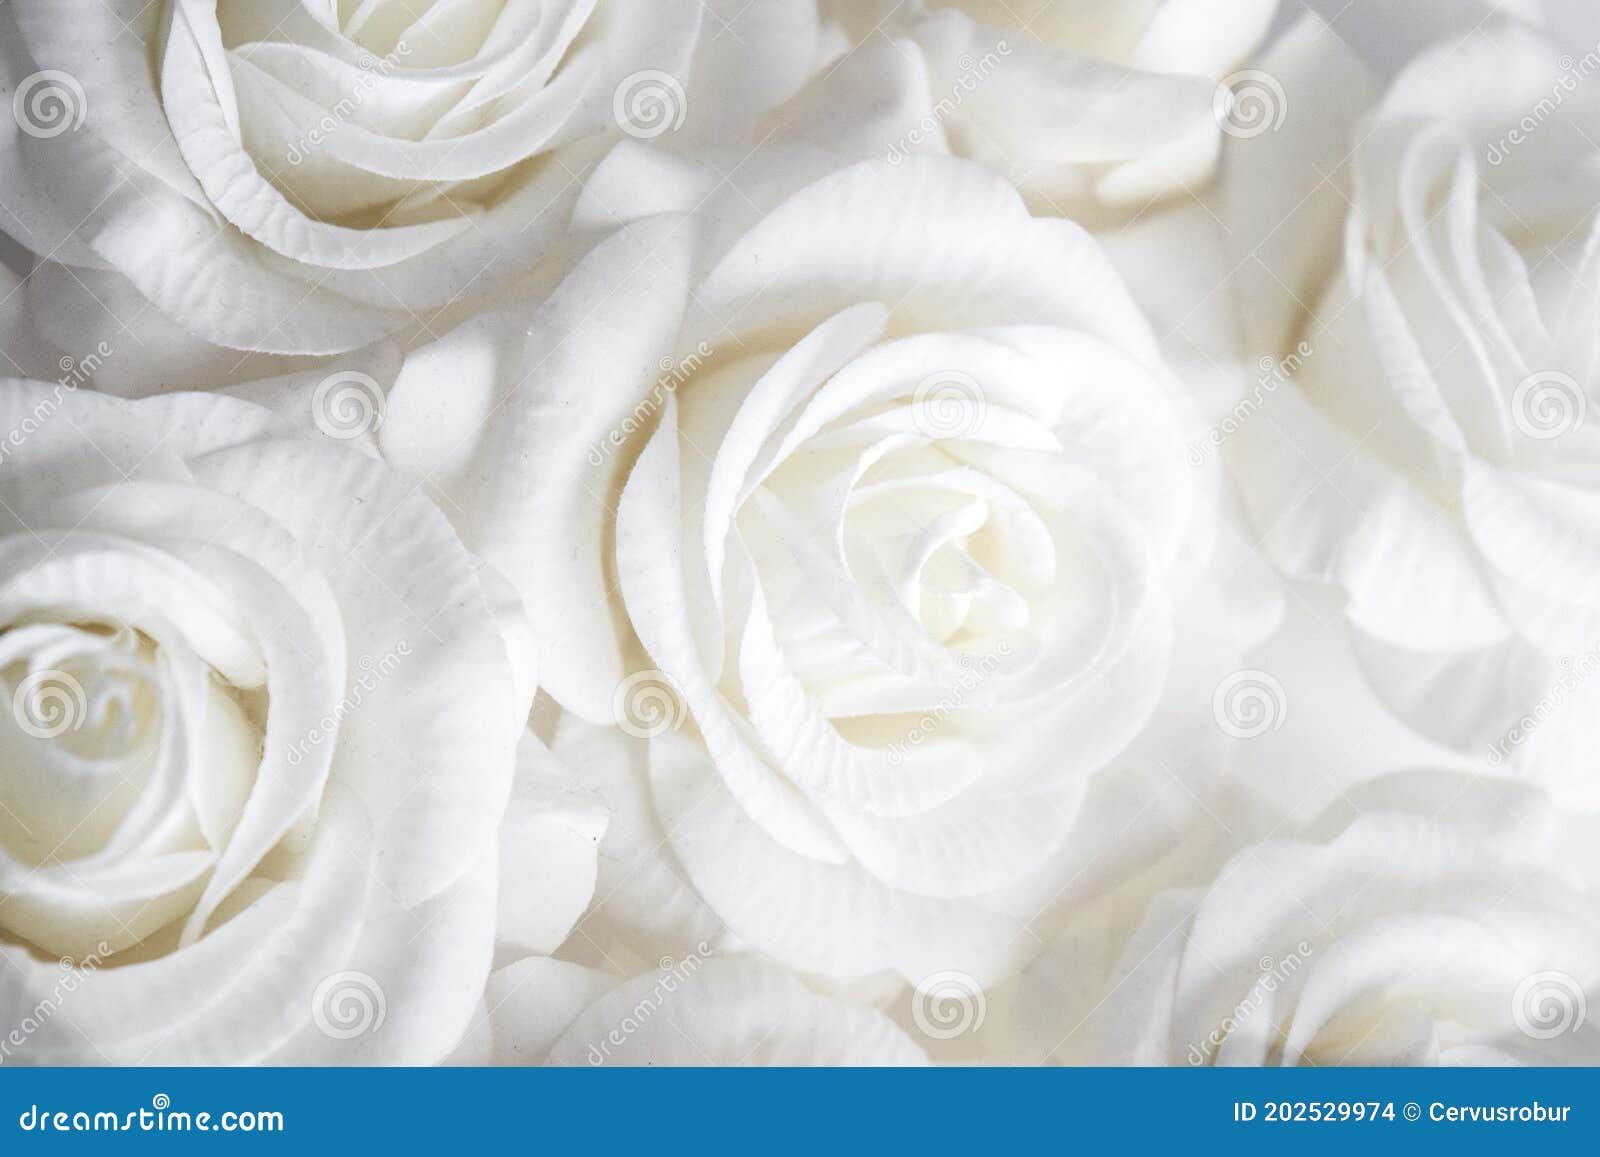 Unique Background Formed by White Roses Stock Photo - Image of pure,  flawless: 202529974